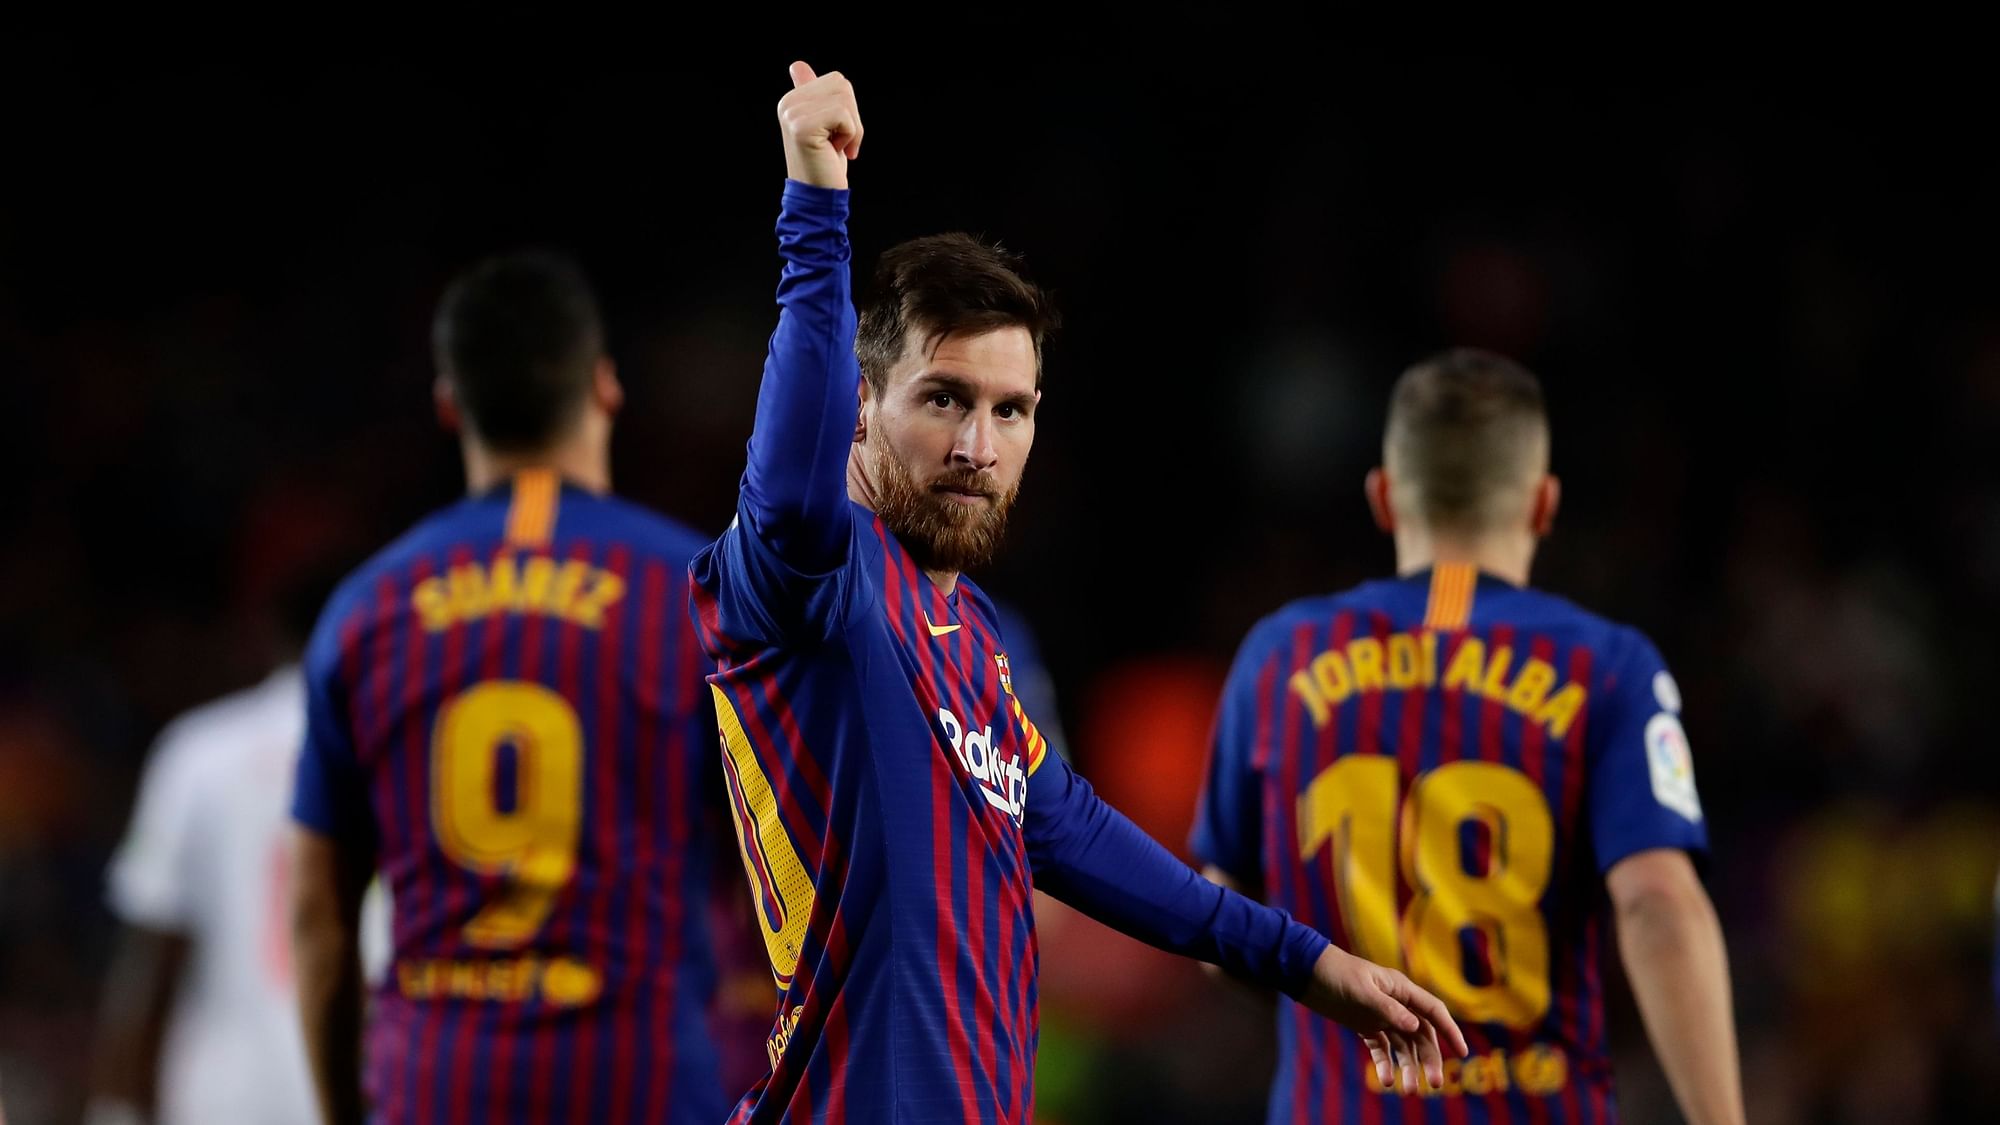 FC Barcelona’s Lionel Messi celebrates after scoring his side’s second goal against Eibar at the Camp Nou stadium in Barcelona on Sunday, Jan 13, 2019.